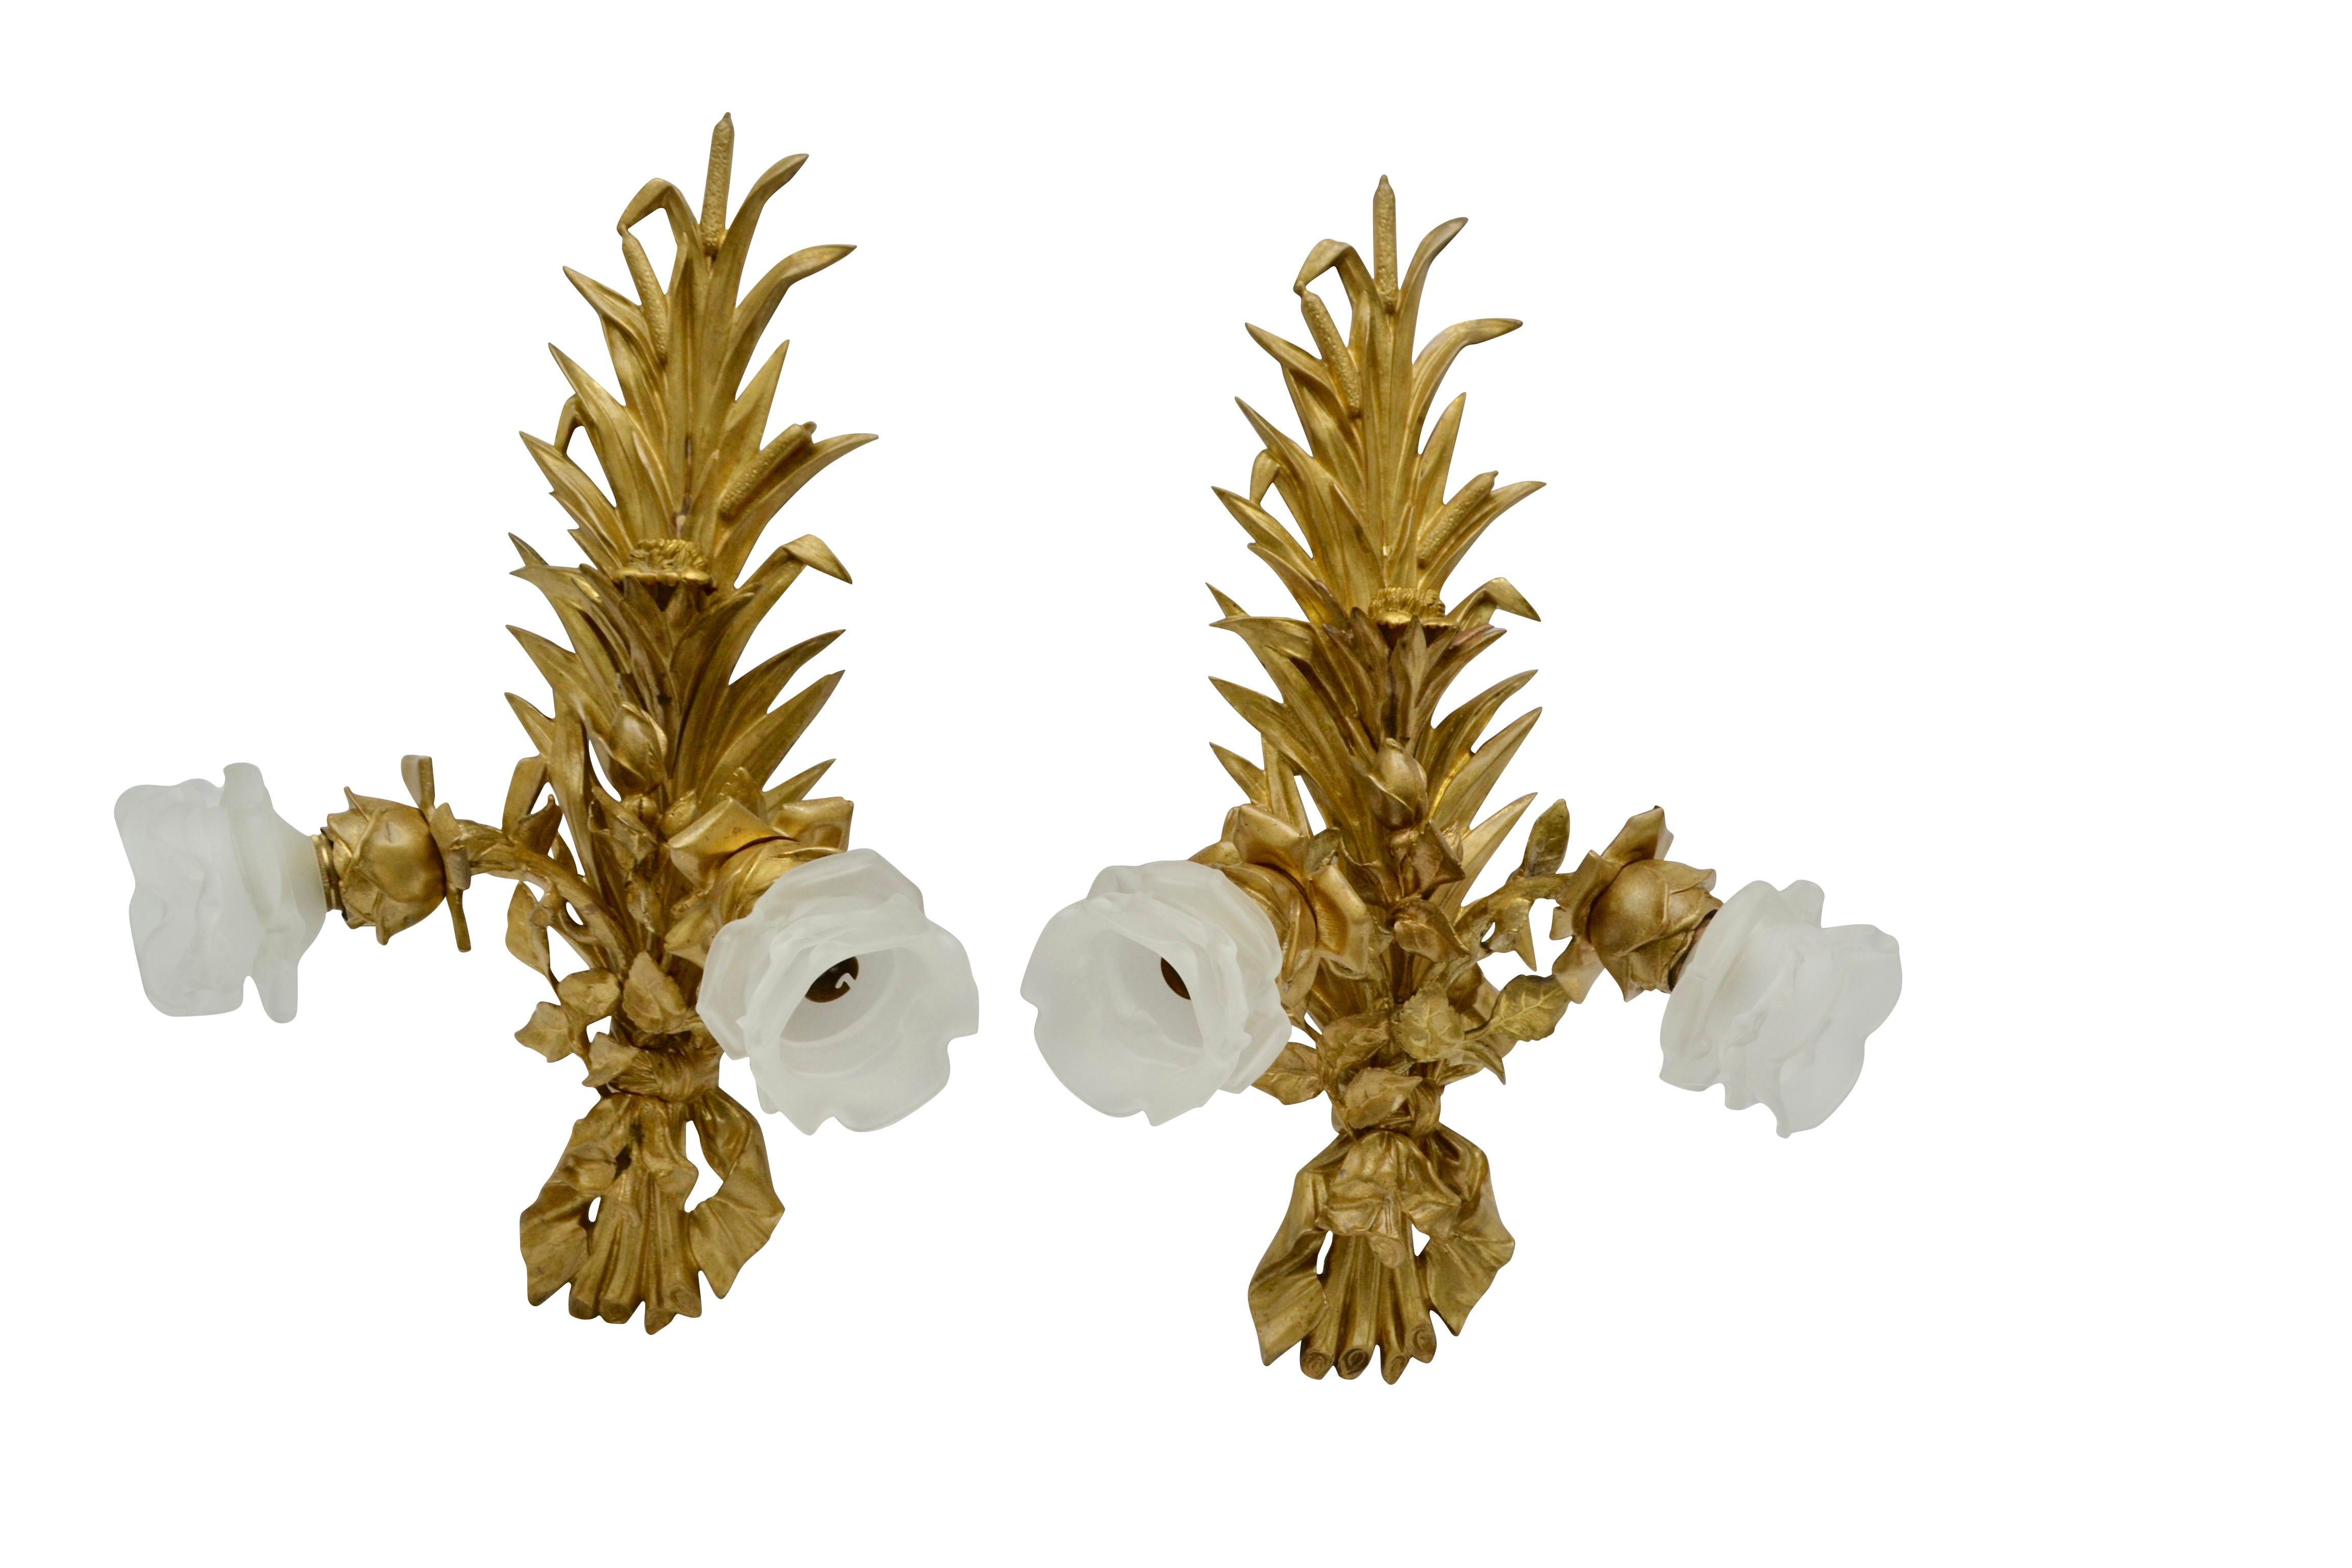 A pair of very well cast wall sconces in the shapes of bullrushes. The bronzes show signs of earlier gilding and are now a dull gold colour. Each sconce has a pair of electrified decorative floral nozzles holding a frosted glass flower shade. There